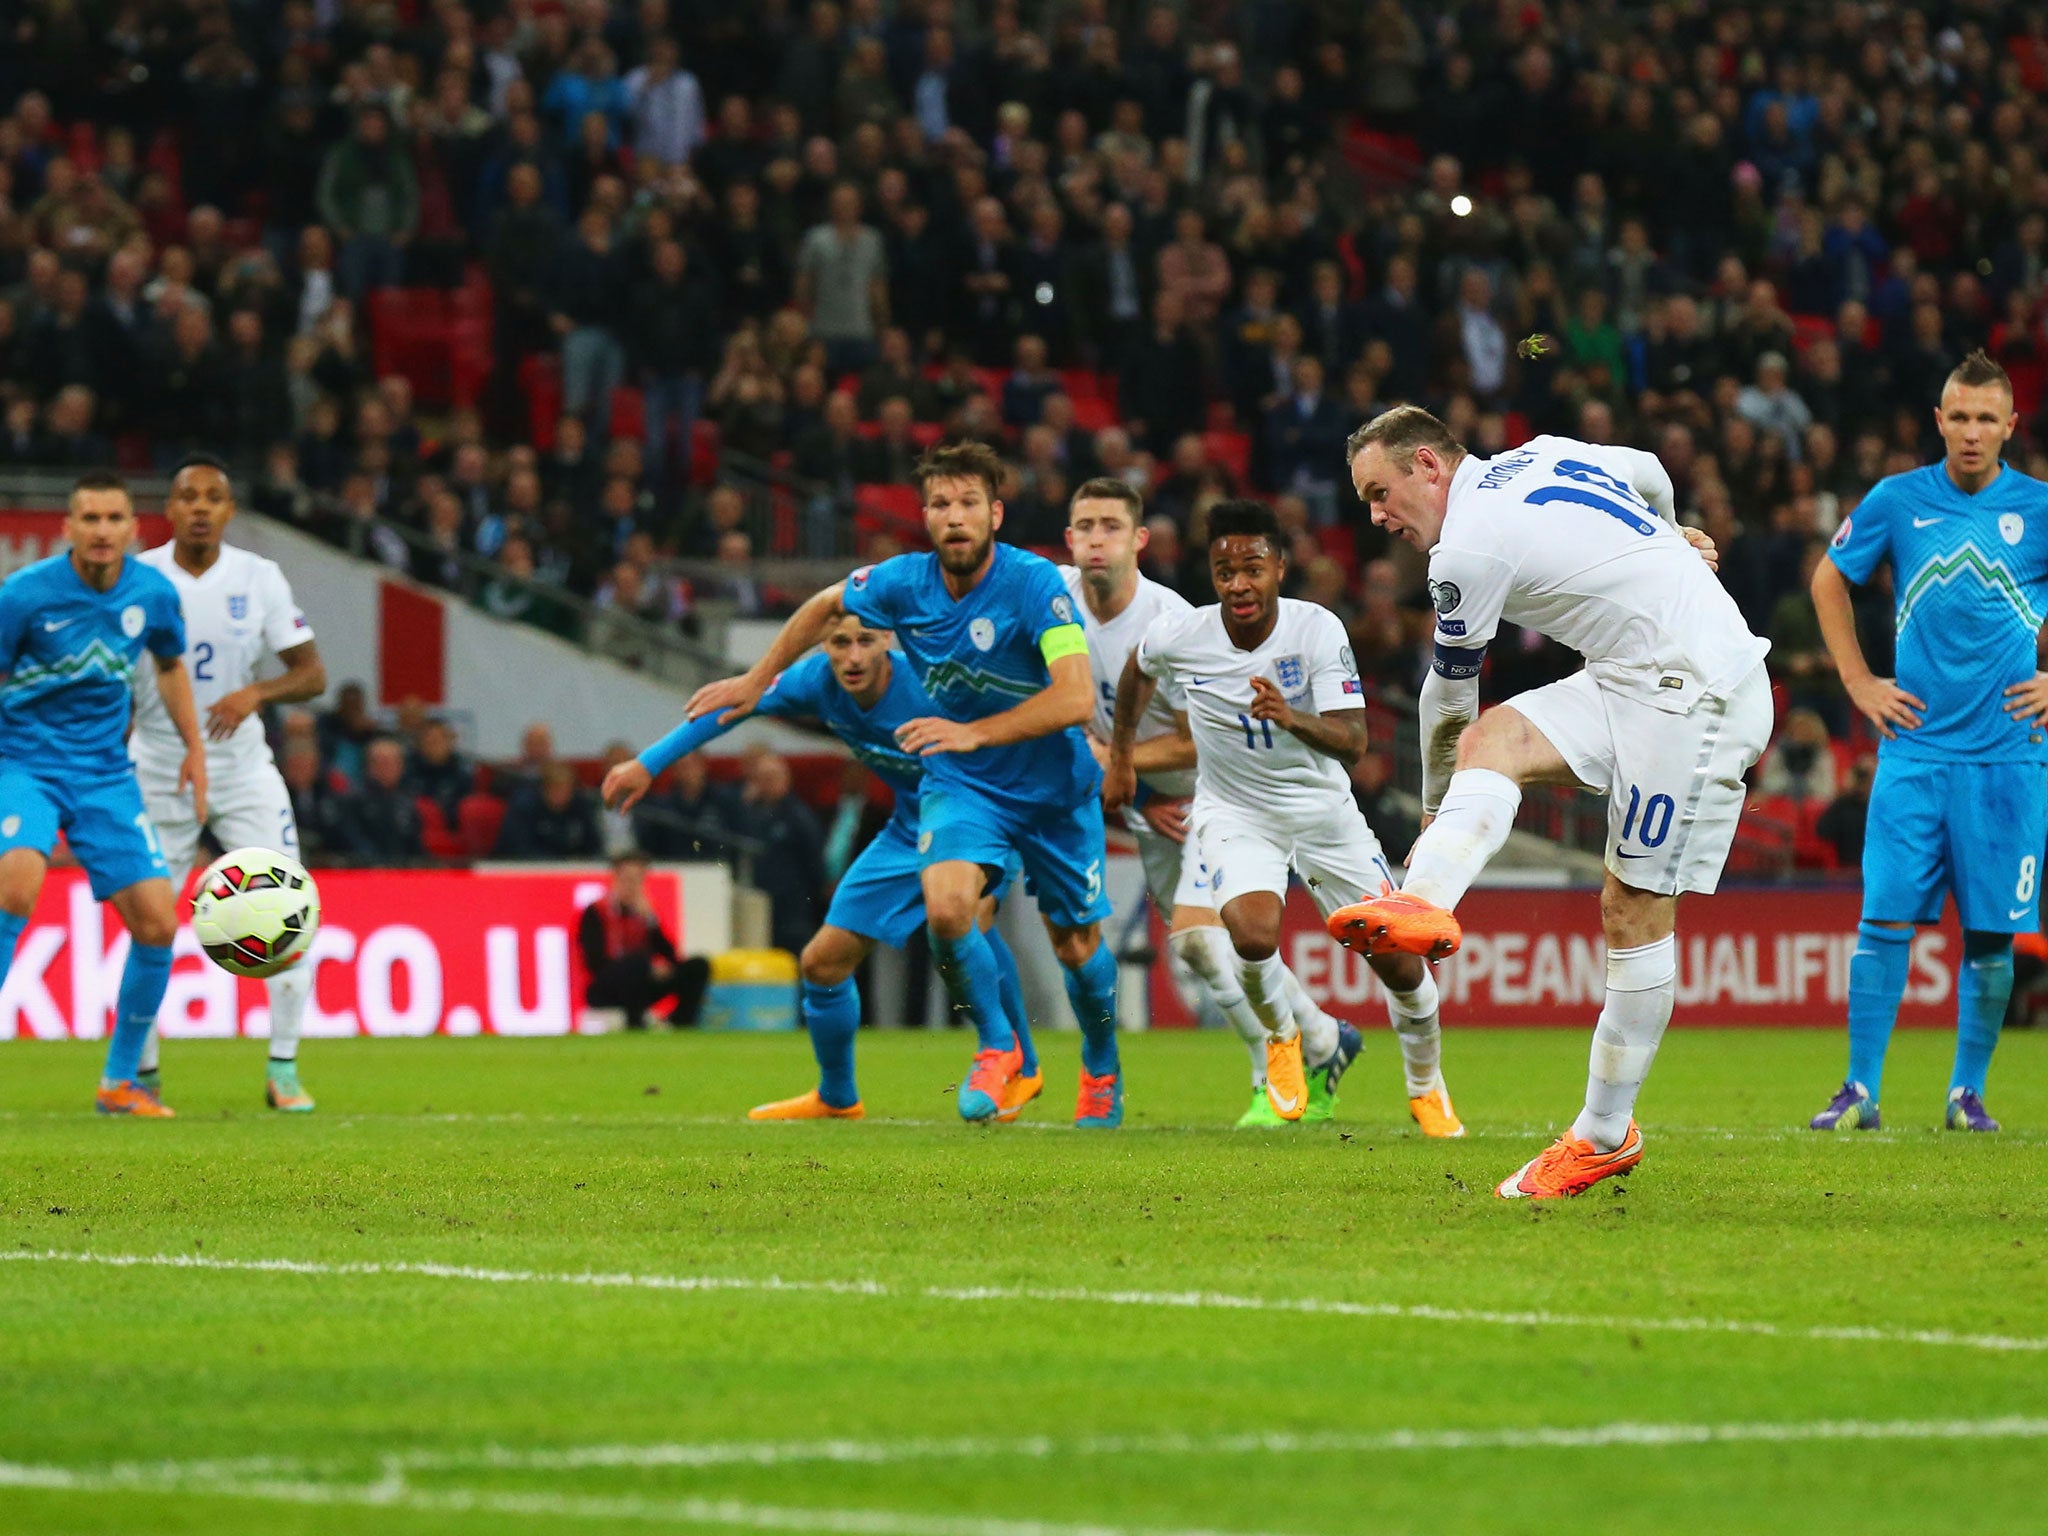 Rooney equalises from the penalty spot